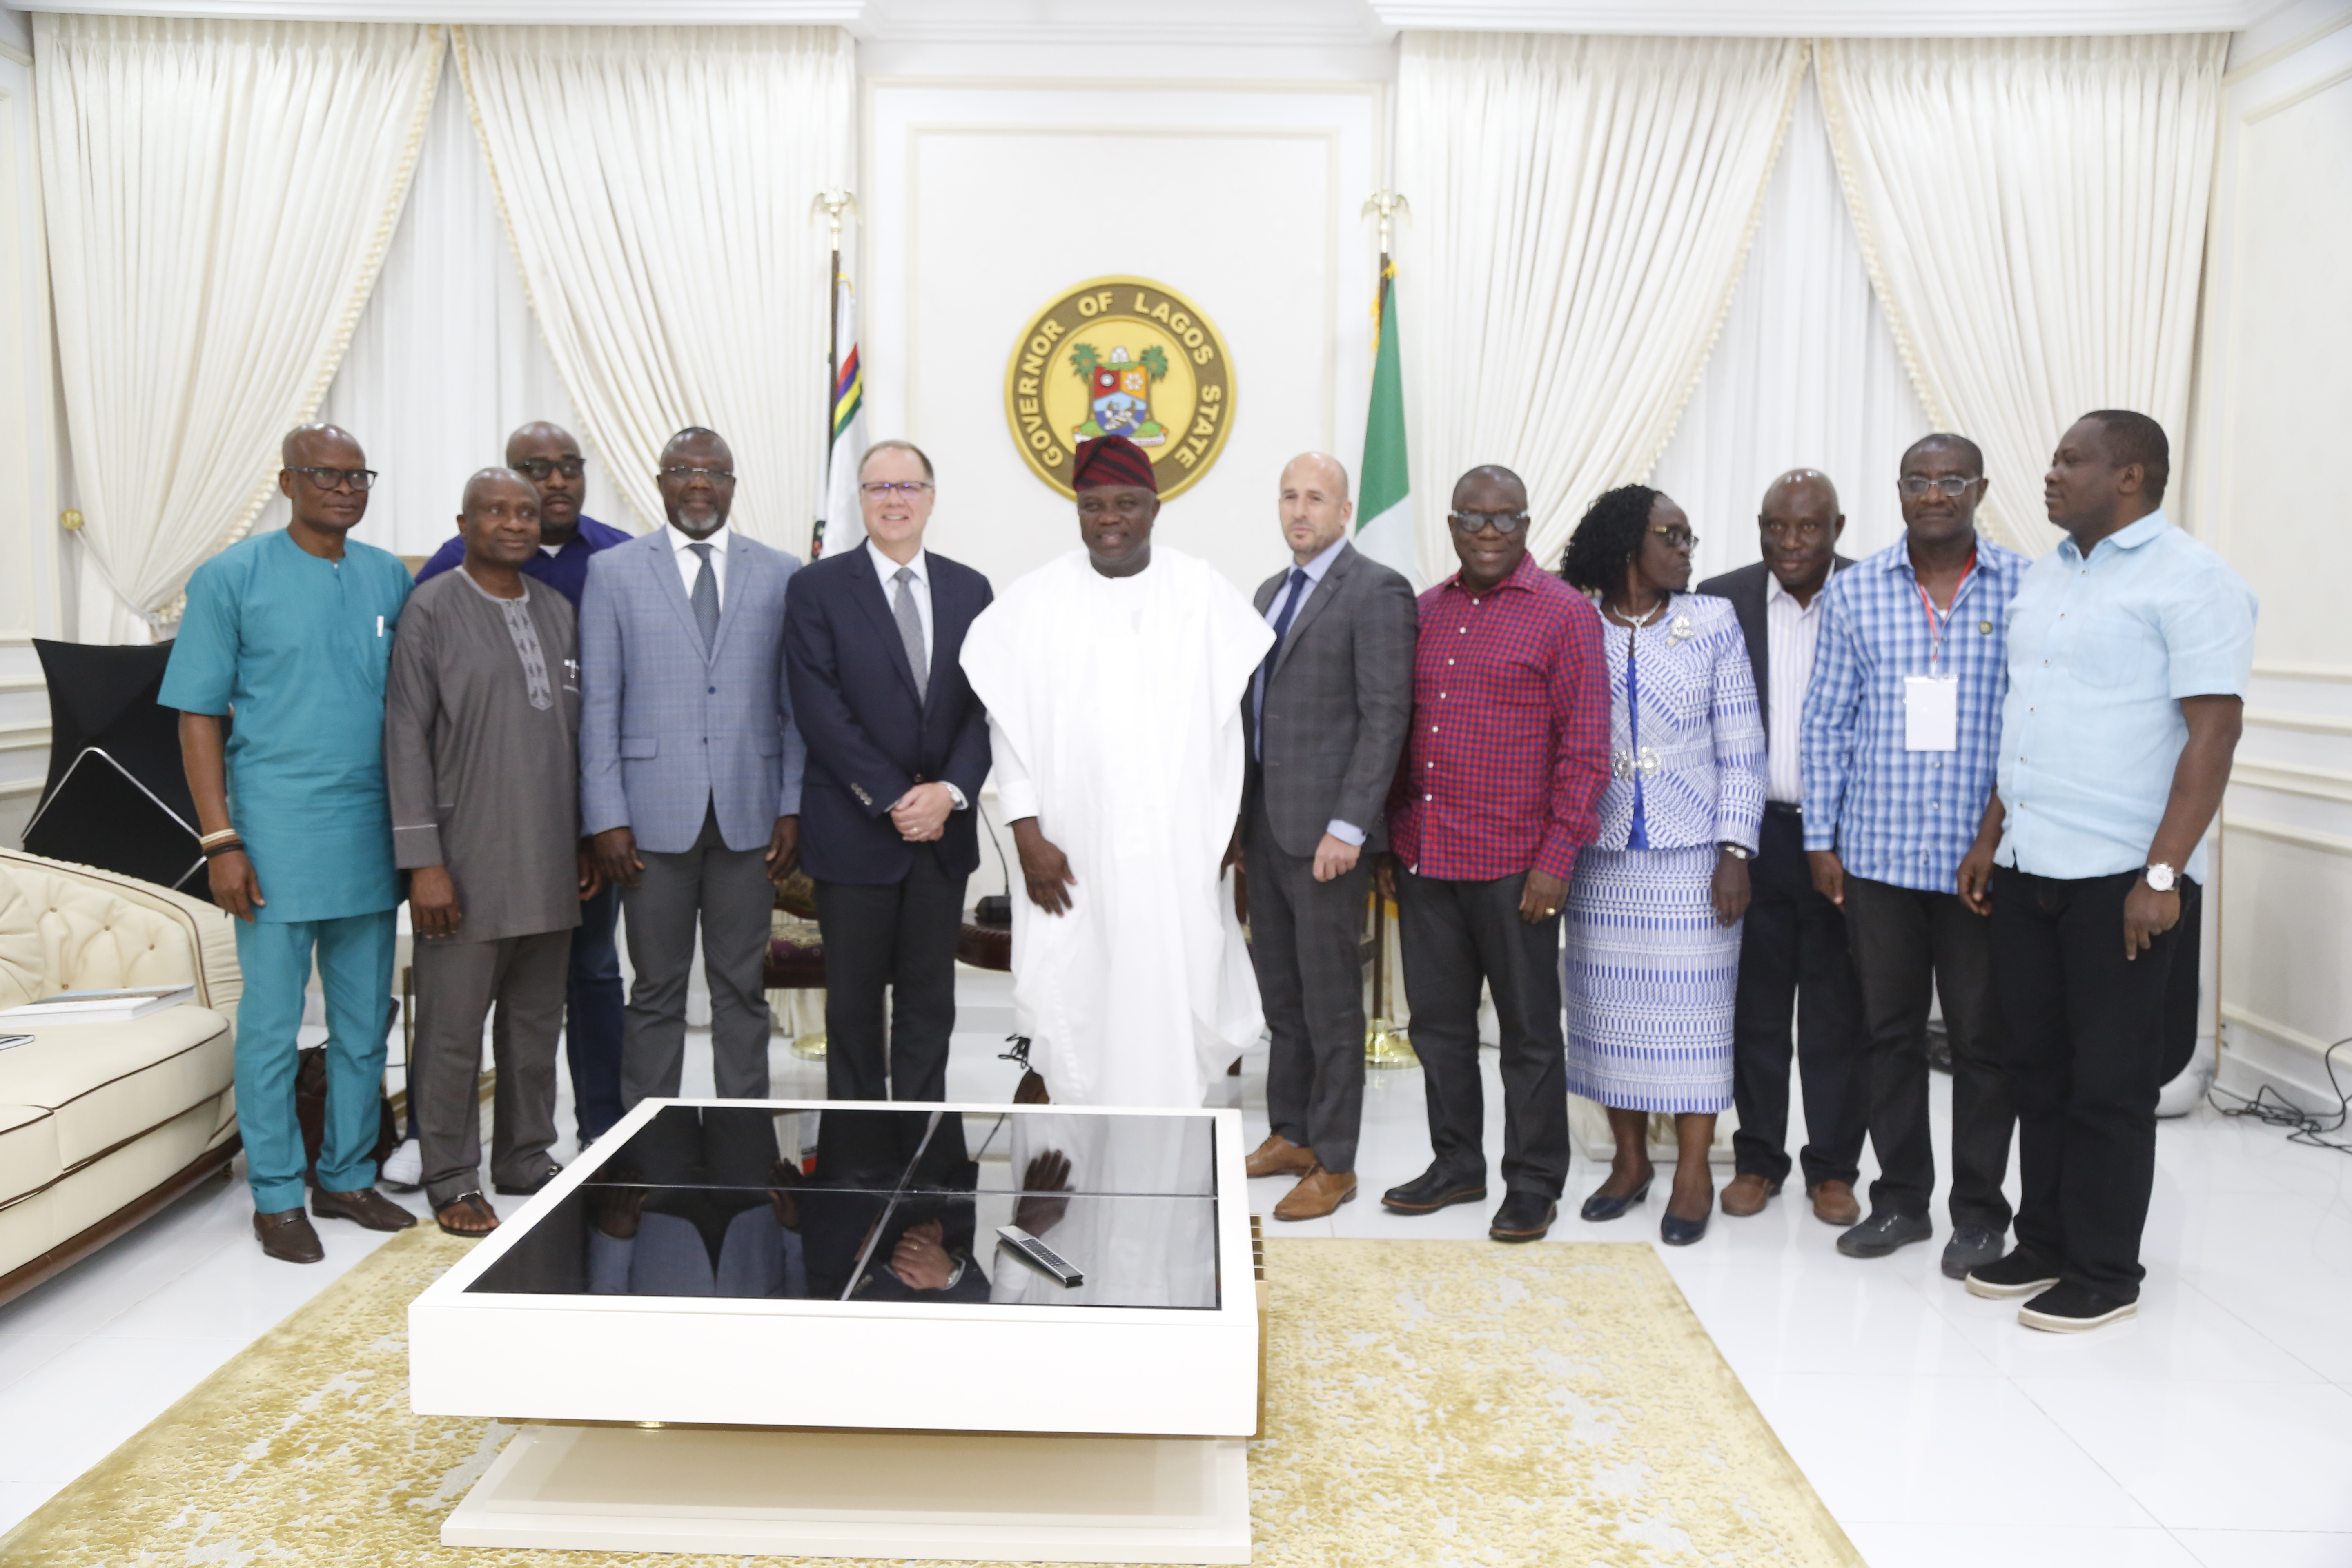 Lagos State Governor, Mr. Akinwunmi Ambode (5th left), with High Commissioner of Canada to Nigeria, Mr. Christopher Thornley (4th left); Special Adviser to the Governor on Lagos Global, Prof. Ademola Abass (3rd left); Deputy High Commissioner of Canada to Nigeria, Mr. James  Christoff (middle); Attorney General/Commissioner for Justice, Mr. Adeniji Kazeem (5th right) and some members of the Executive Council during the Canadian High Commissioner’s courtesy visit at the Governor’s residence in Epe, on Thursday, January 25, 2018.